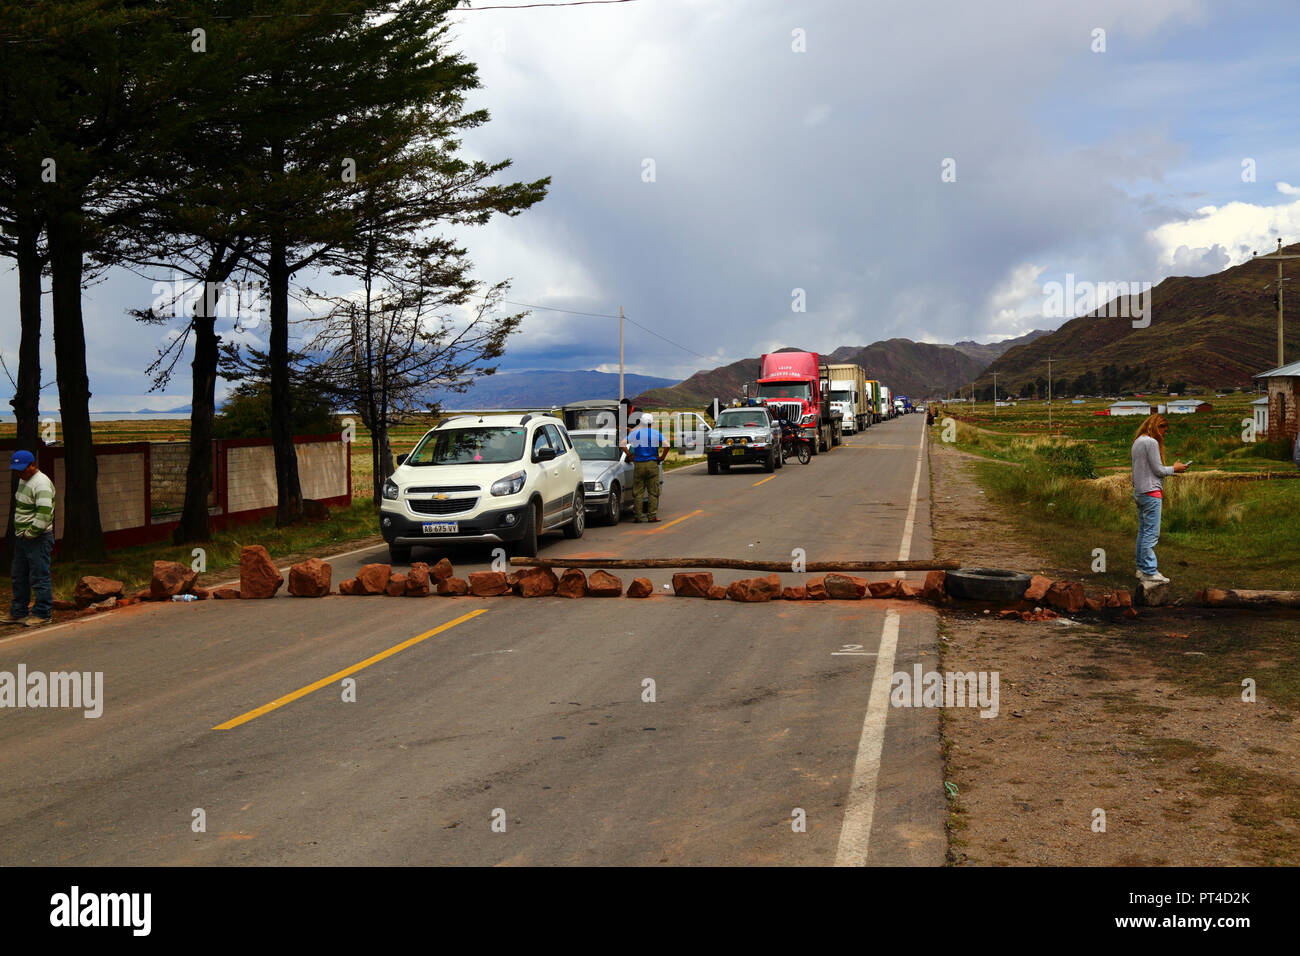 People block the main road between Puno and Desaguadero at Zepita in a protest against local authorities not keeping promises, Peru Stock Photo